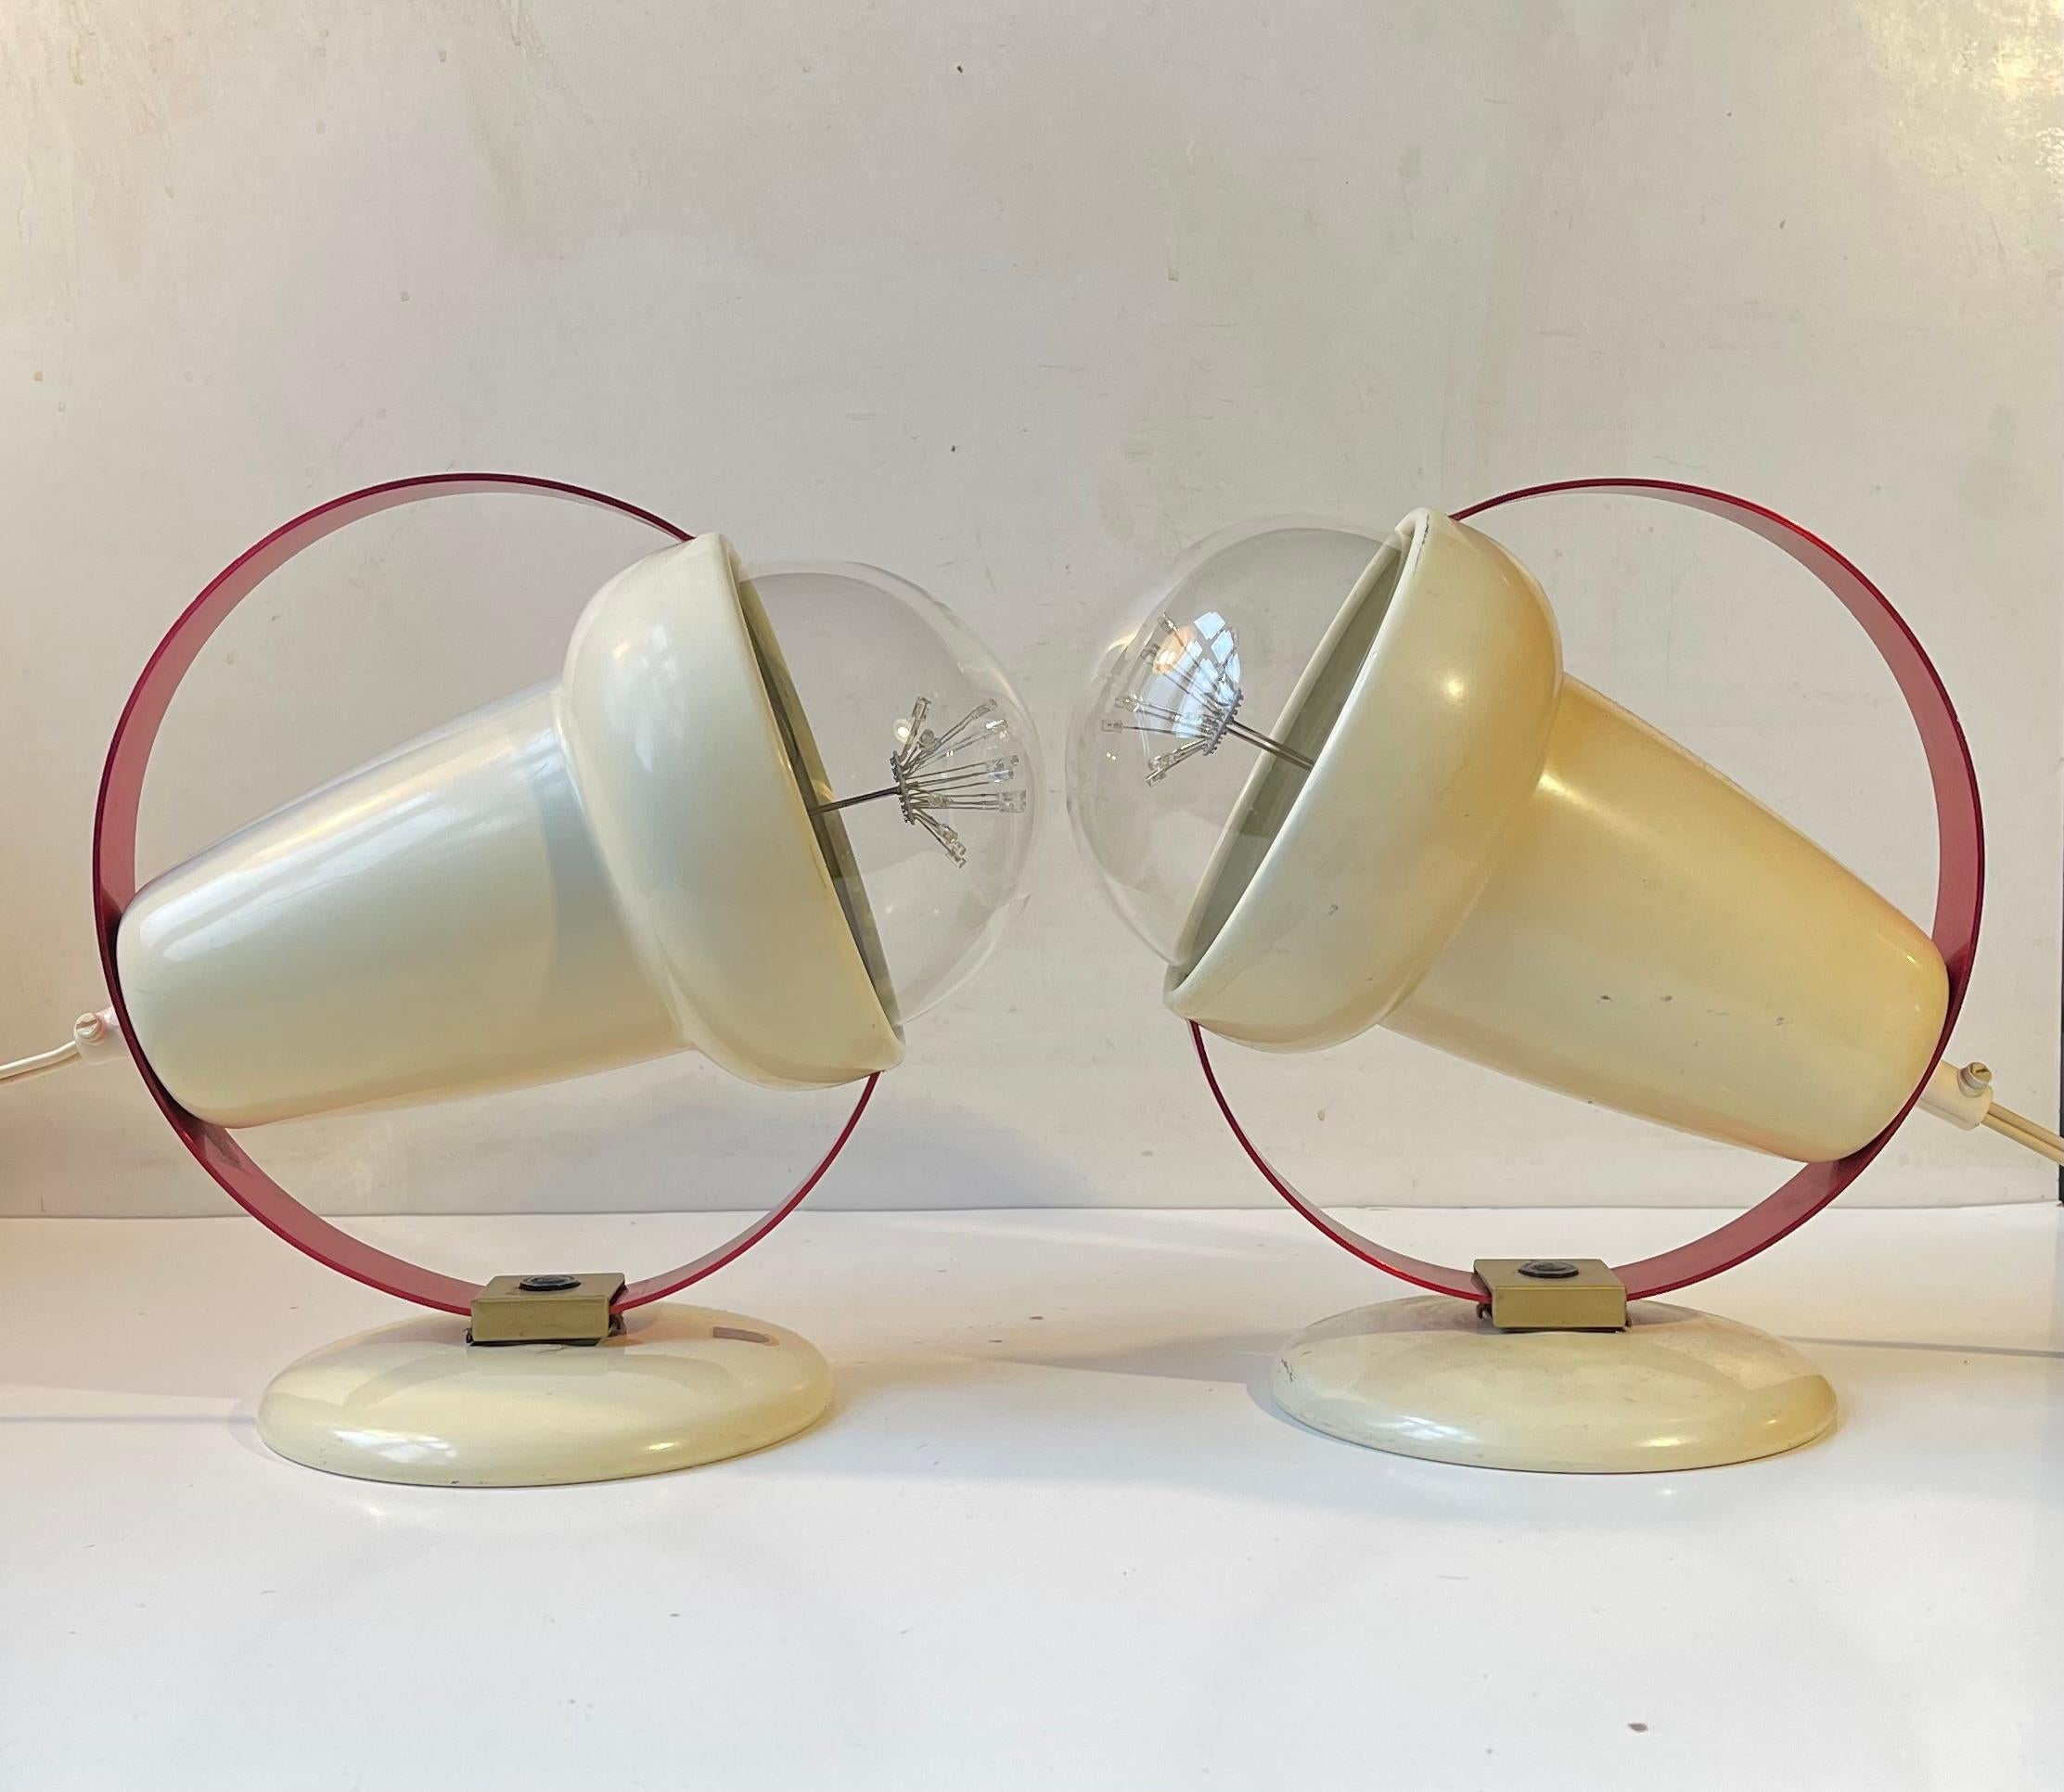 Aluminum Charlotte Perriand Saturn Wall Sconces for Philips, 1960s